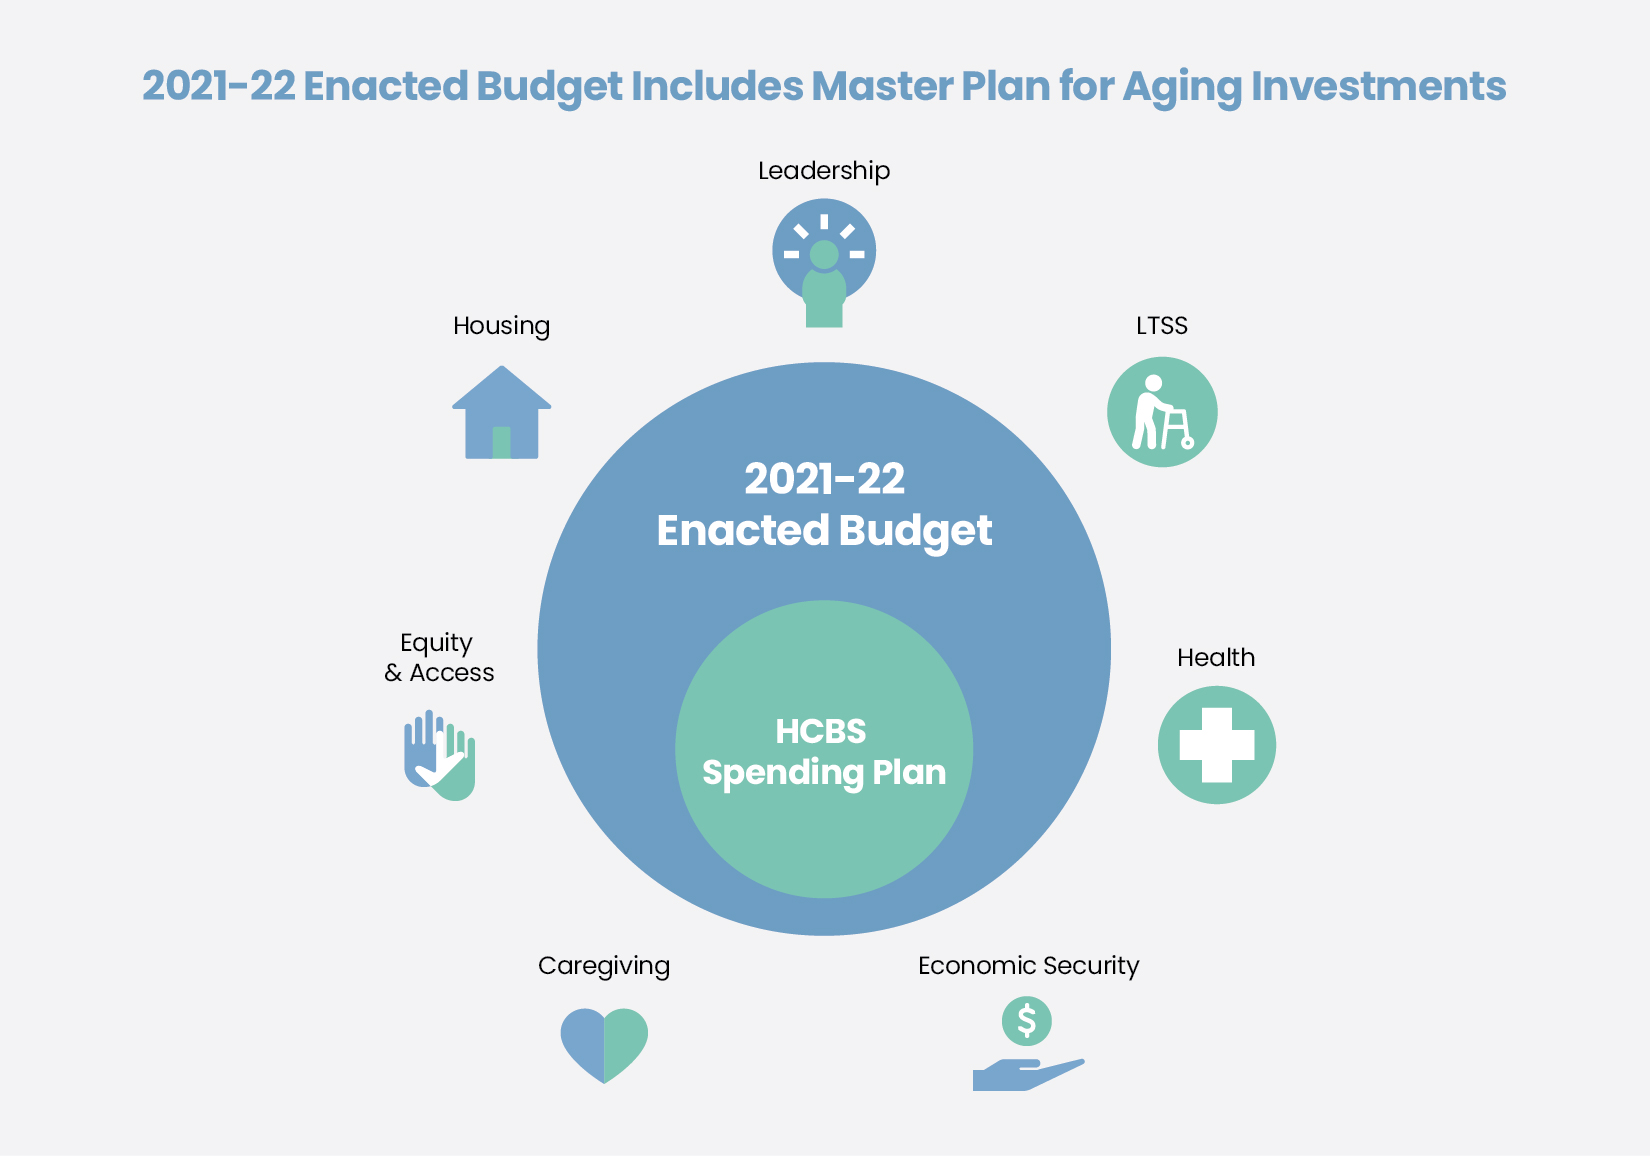 2021-22 Enacted Budget Includes Master Plan for Aging Investments